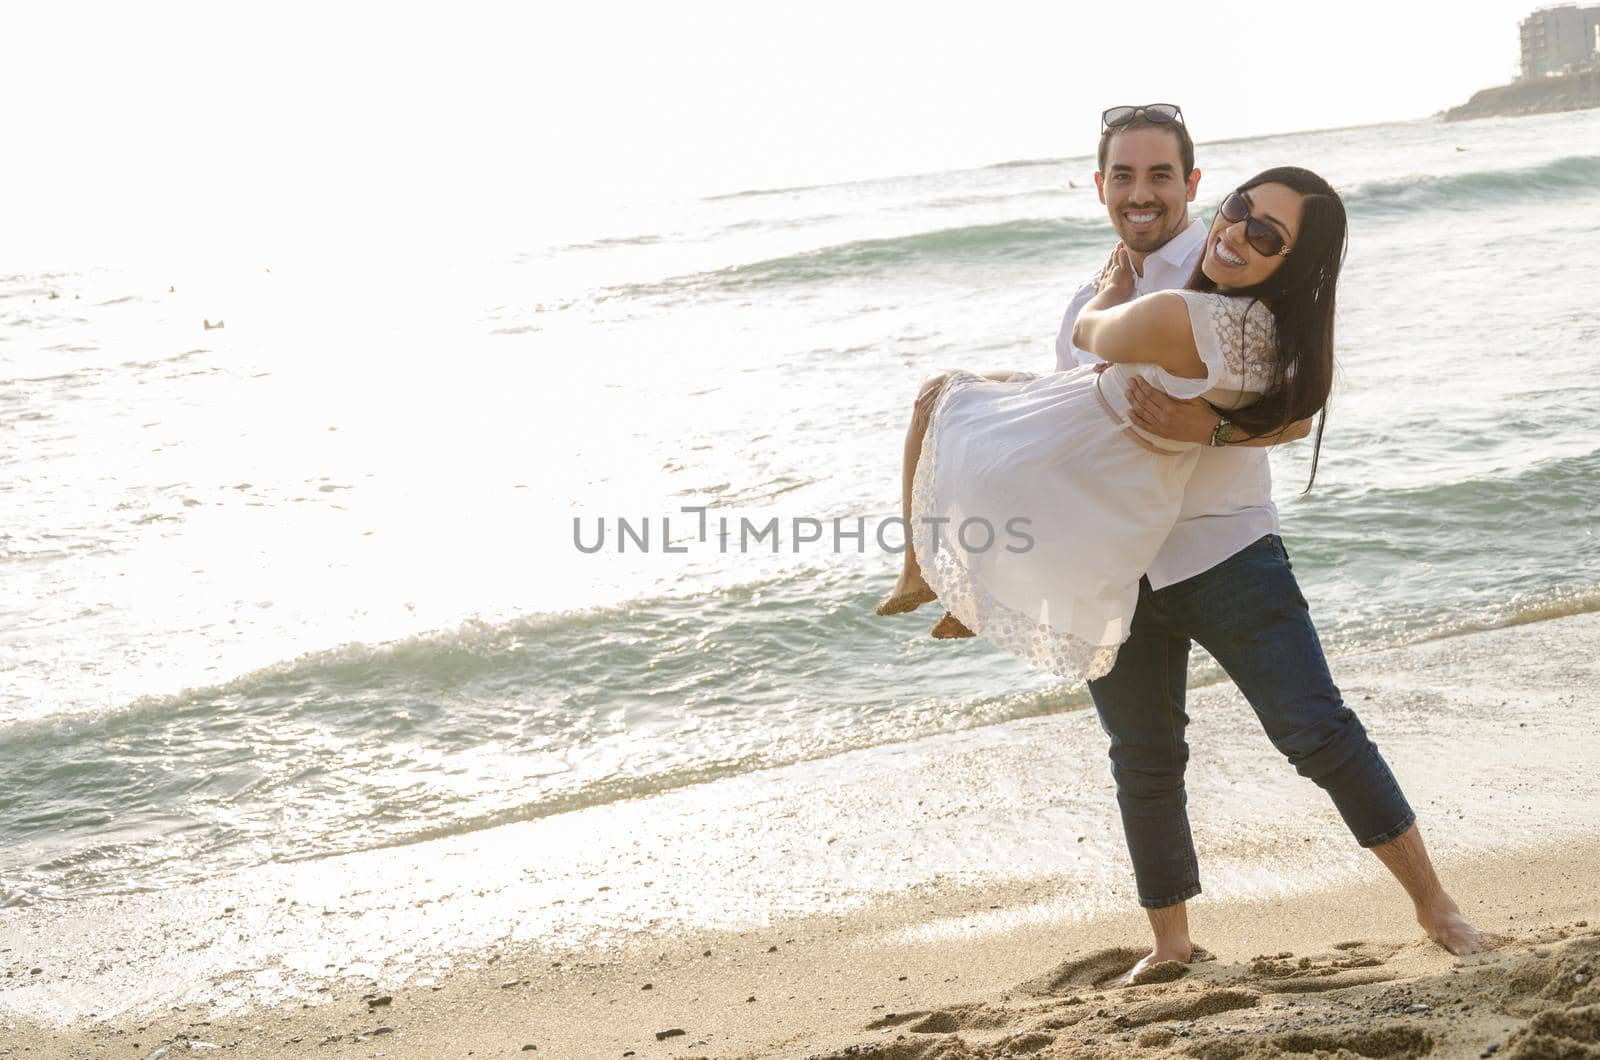 Young man carrying his girlfriend in his arms at the beach